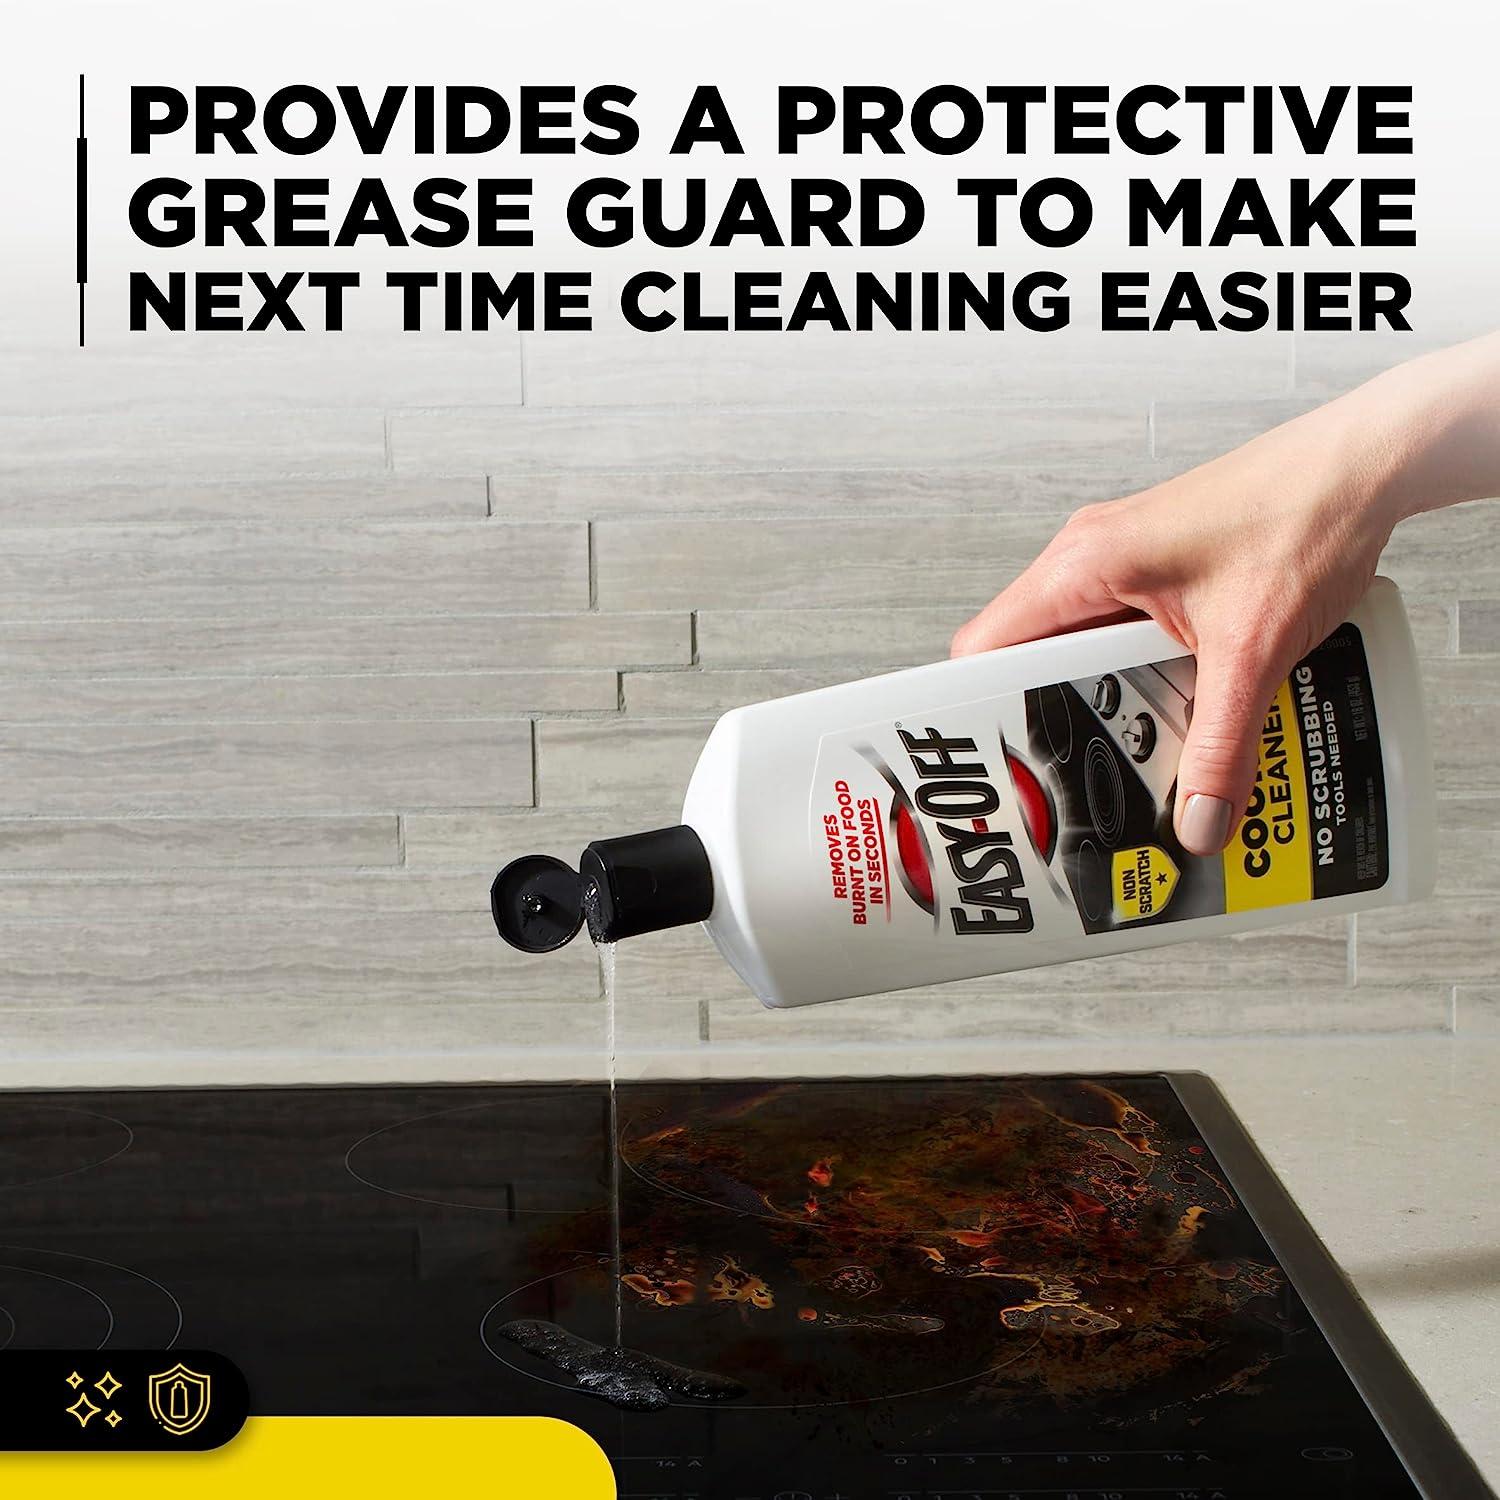 Easy Off 24-oz Spray Oven Cleaner at